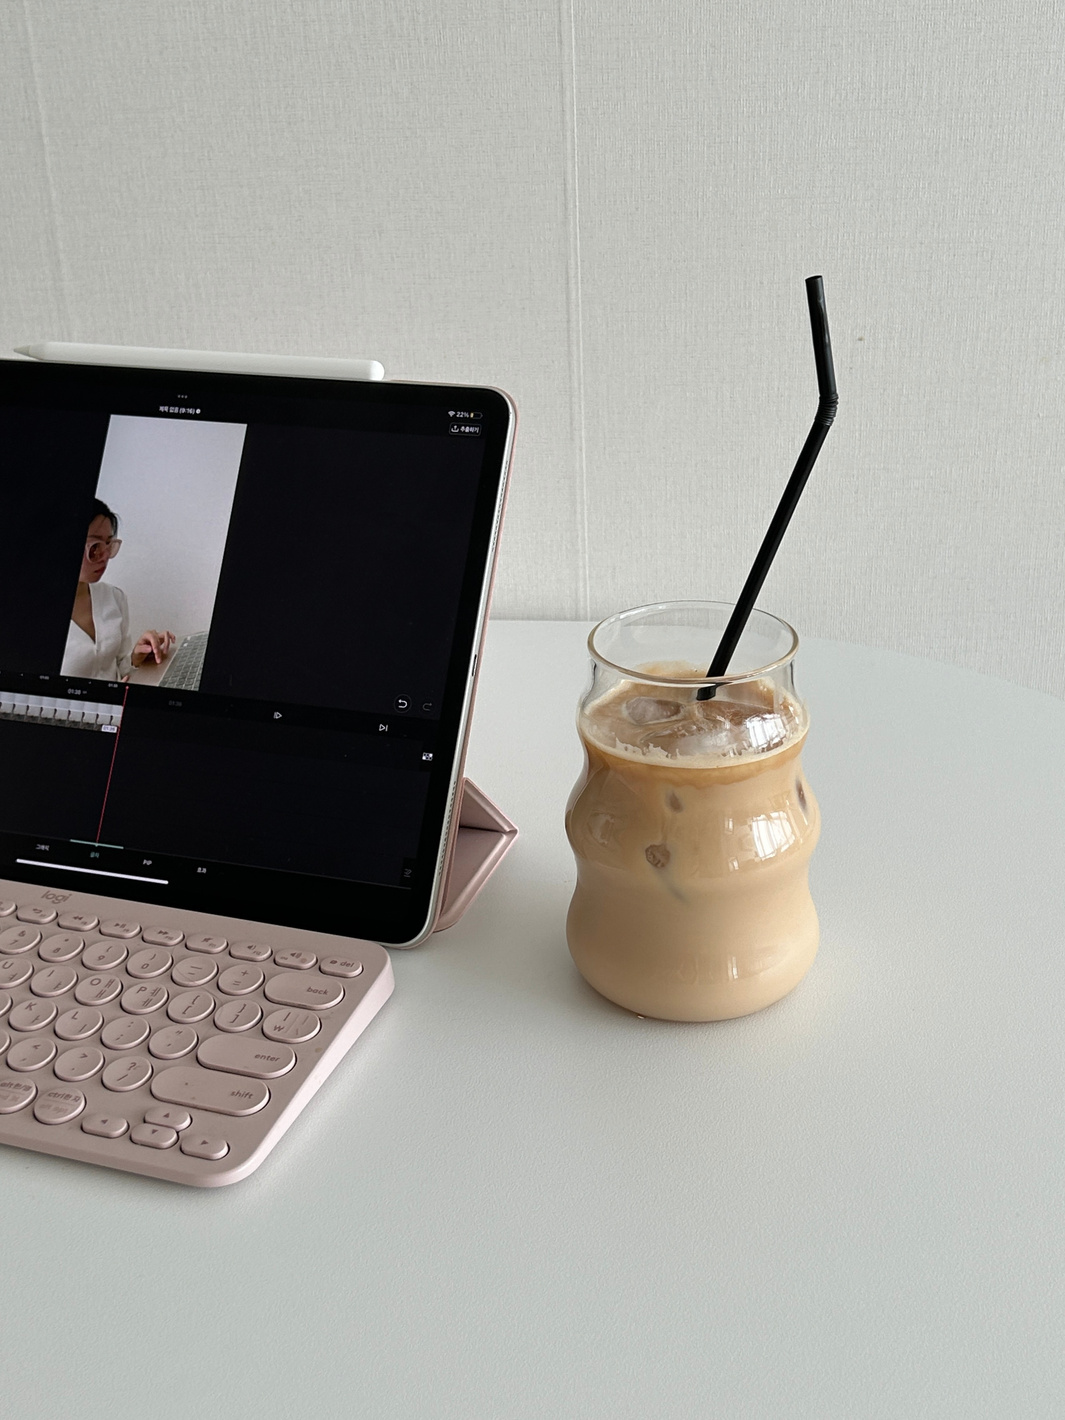 An tablet PC and a cup of iced coffee on the white table